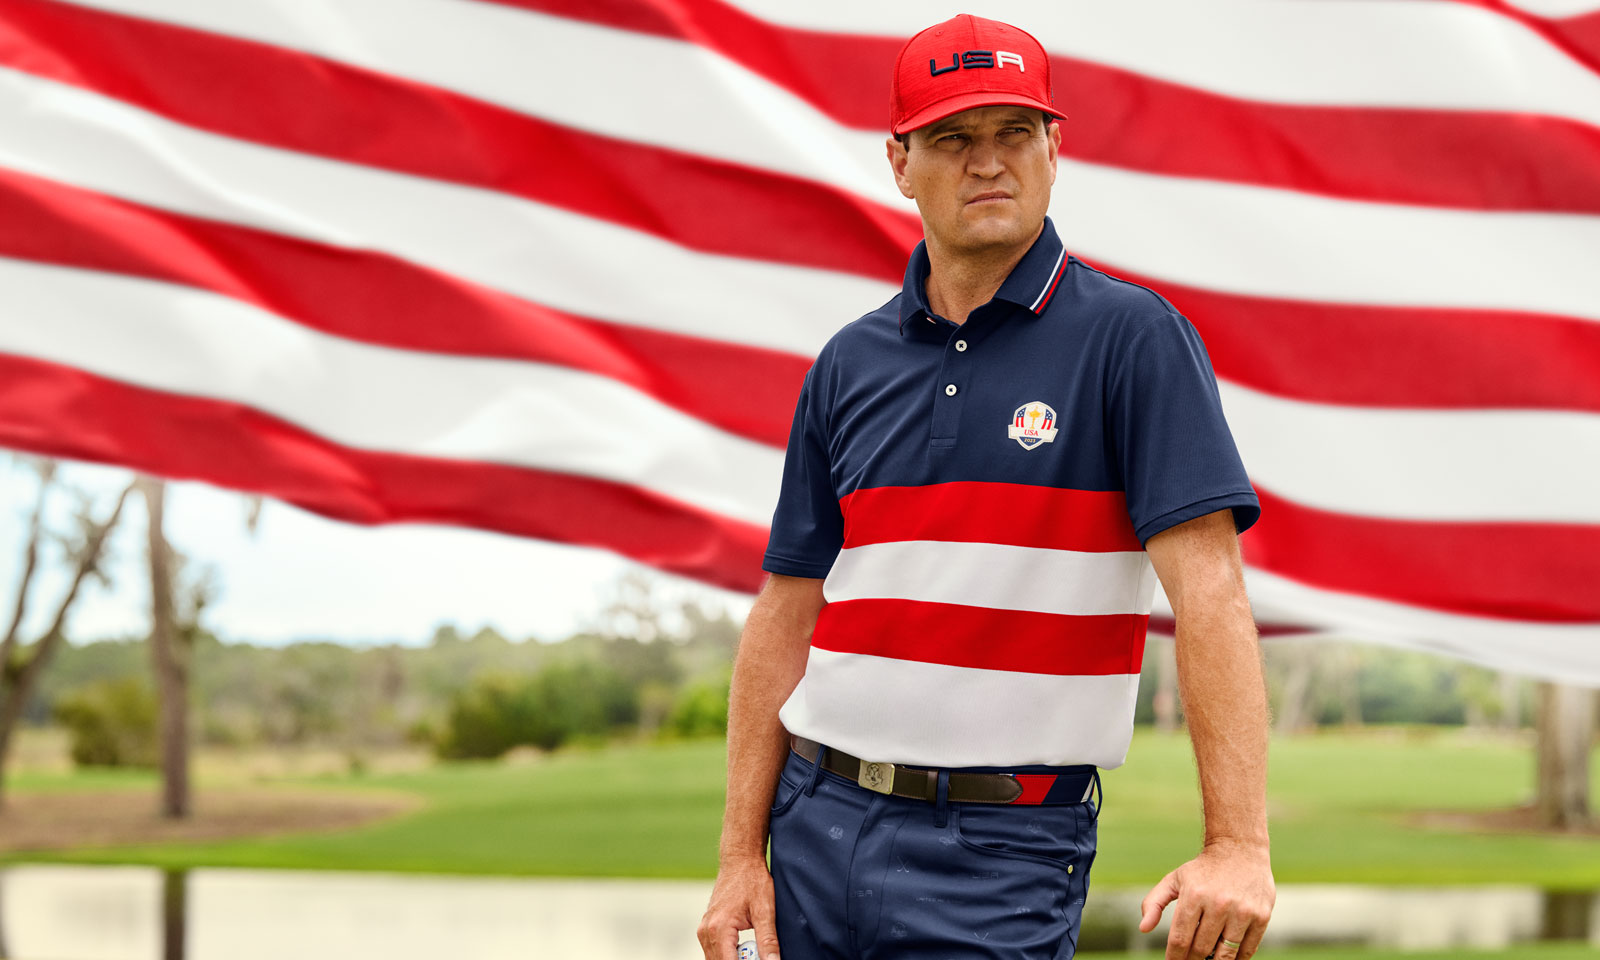 Ralph-Lauren-Teams-Up-with-PGA-for-2023-United-States-Ryder-Cup-Z-Johnson.